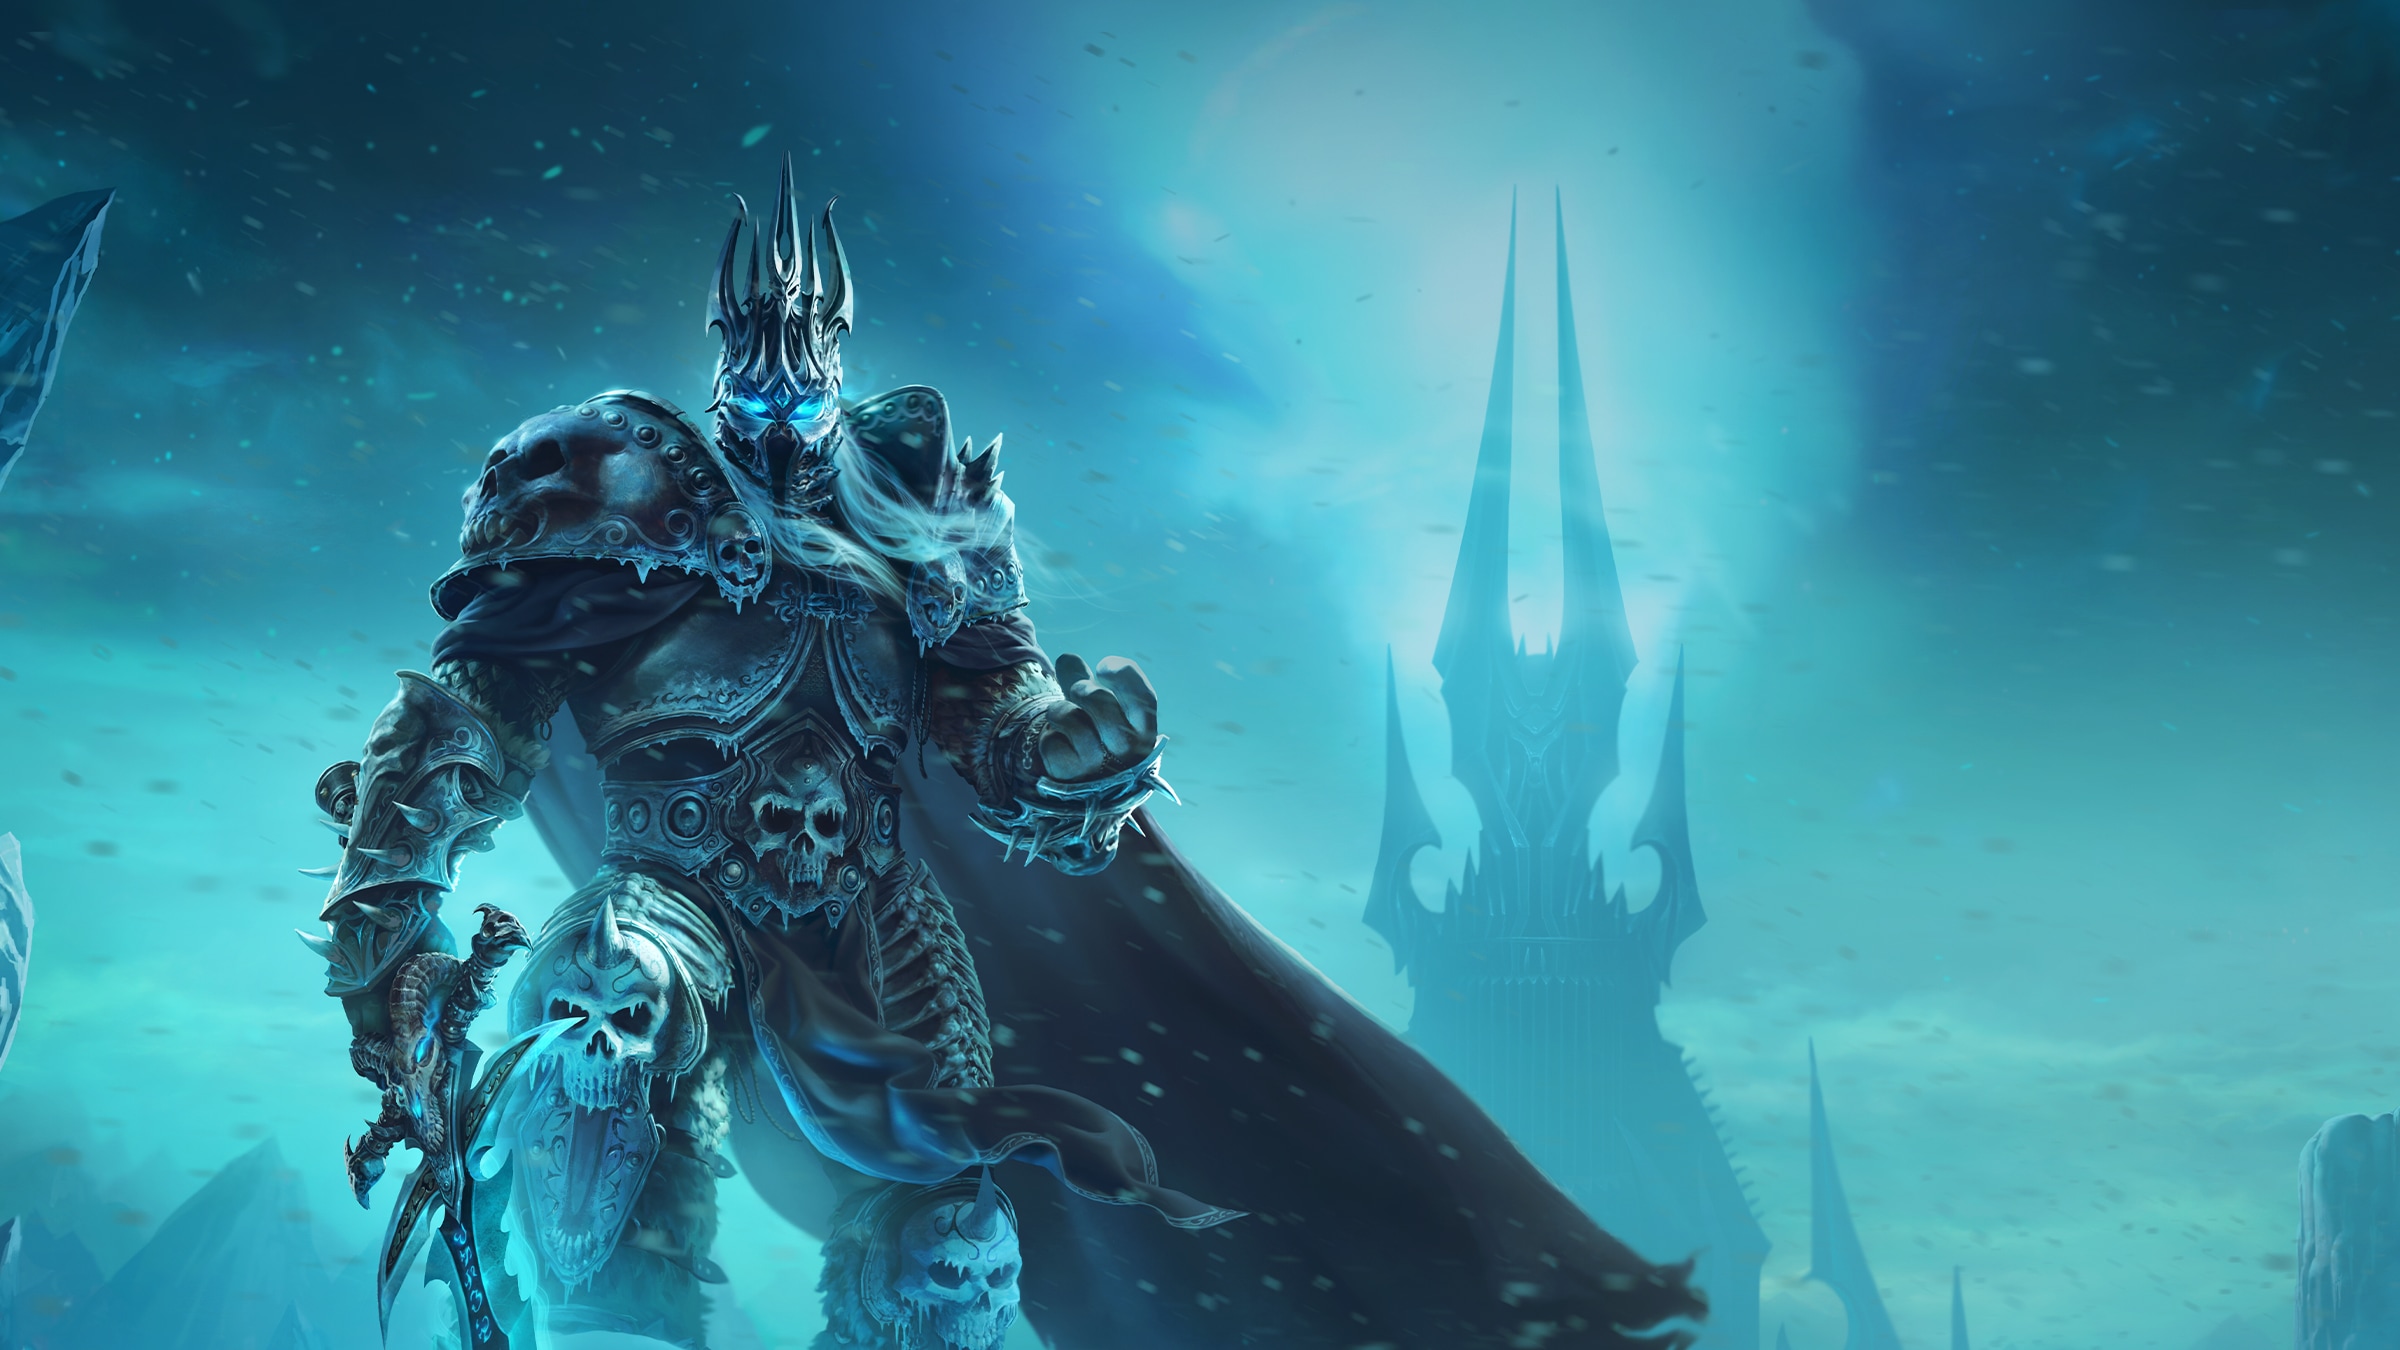 The Wrath of the Lich King Classic™ Pre-Patch Goes Live August 31